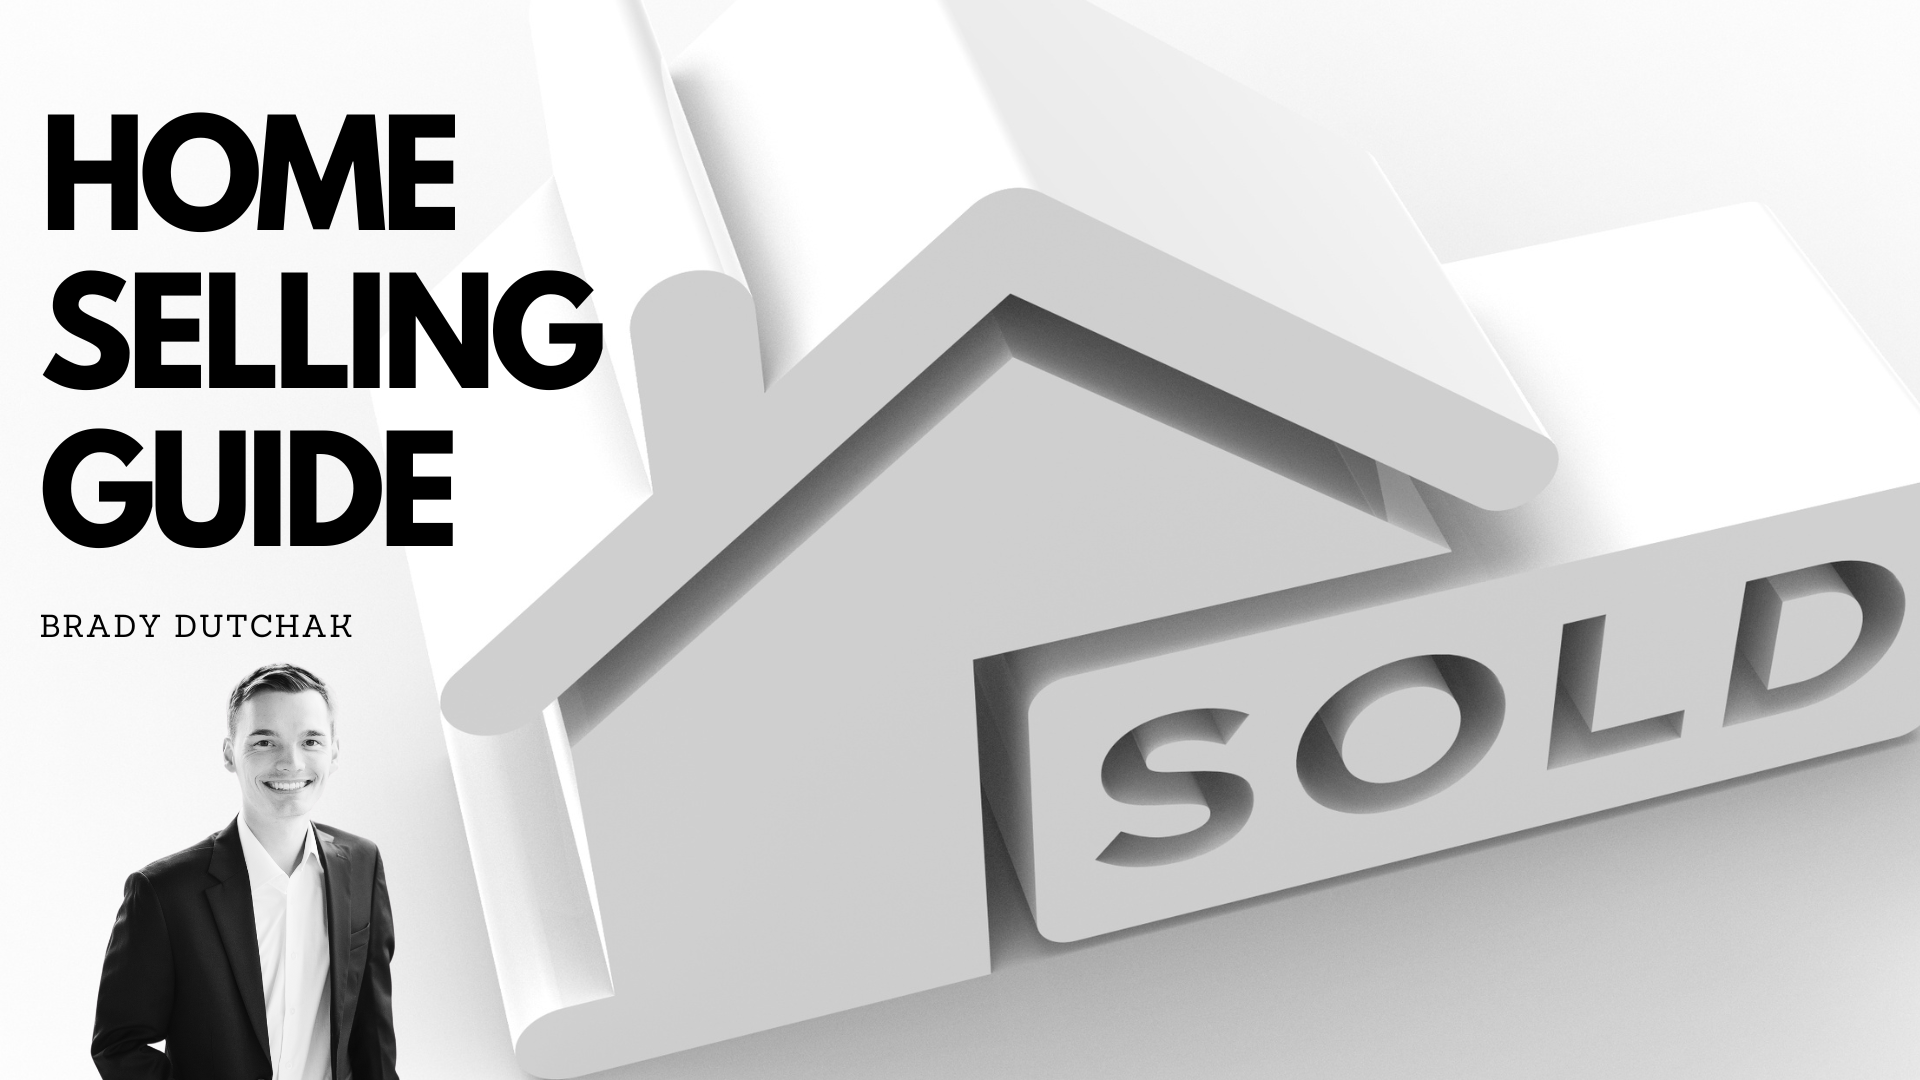 HOME SELLING GUIDE